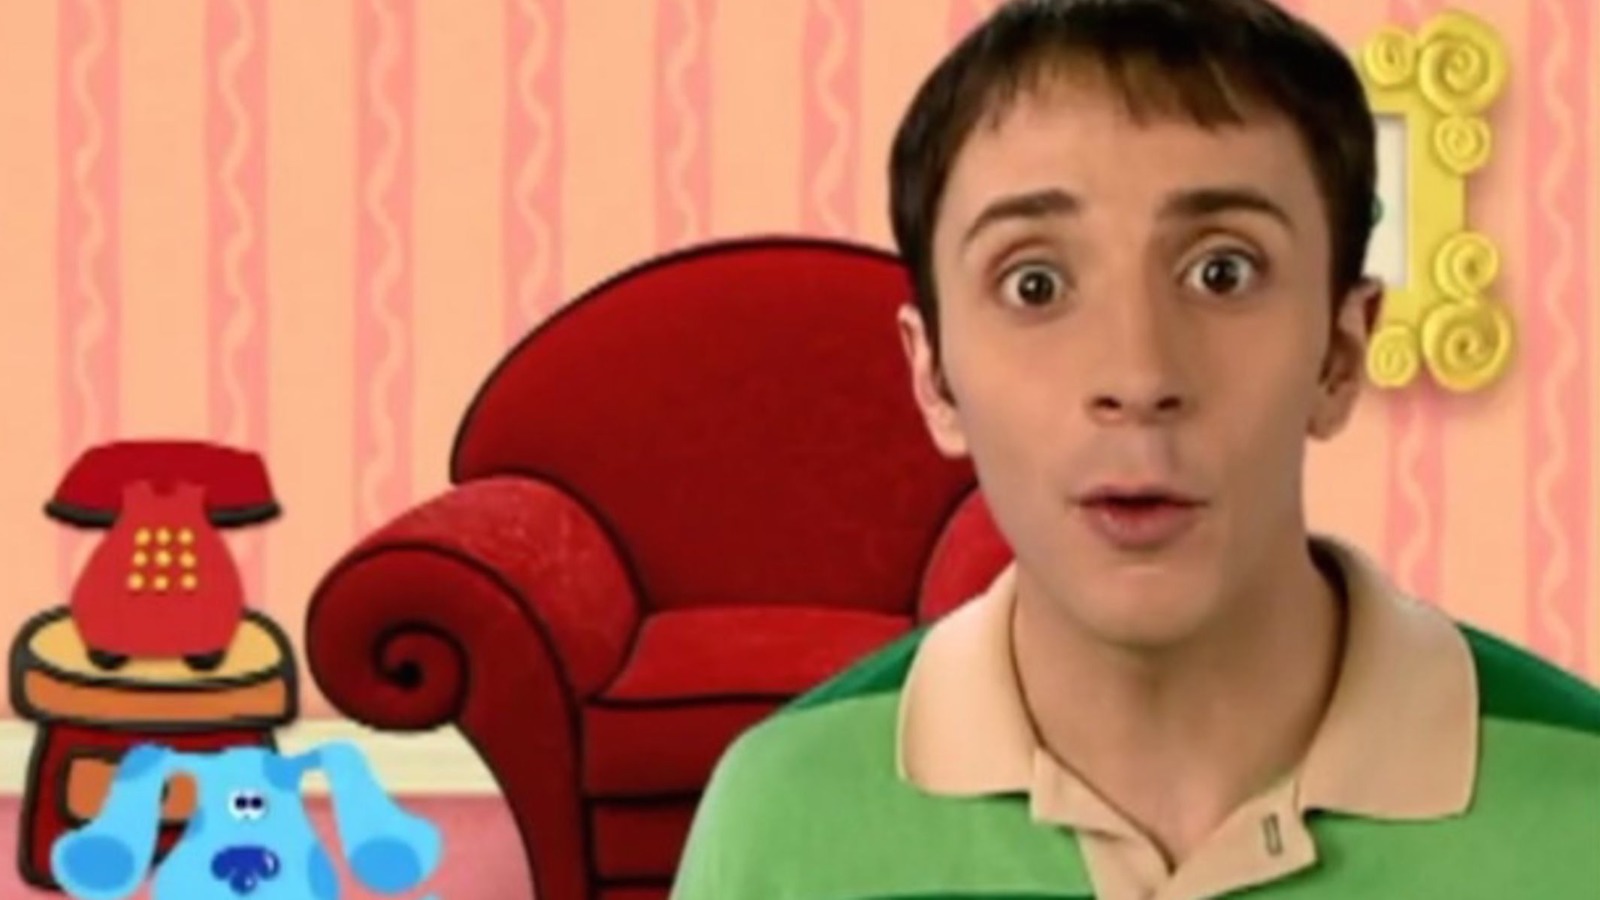 Steve from 'Blue's Clues' is back, and he's lost his hair - wide 4